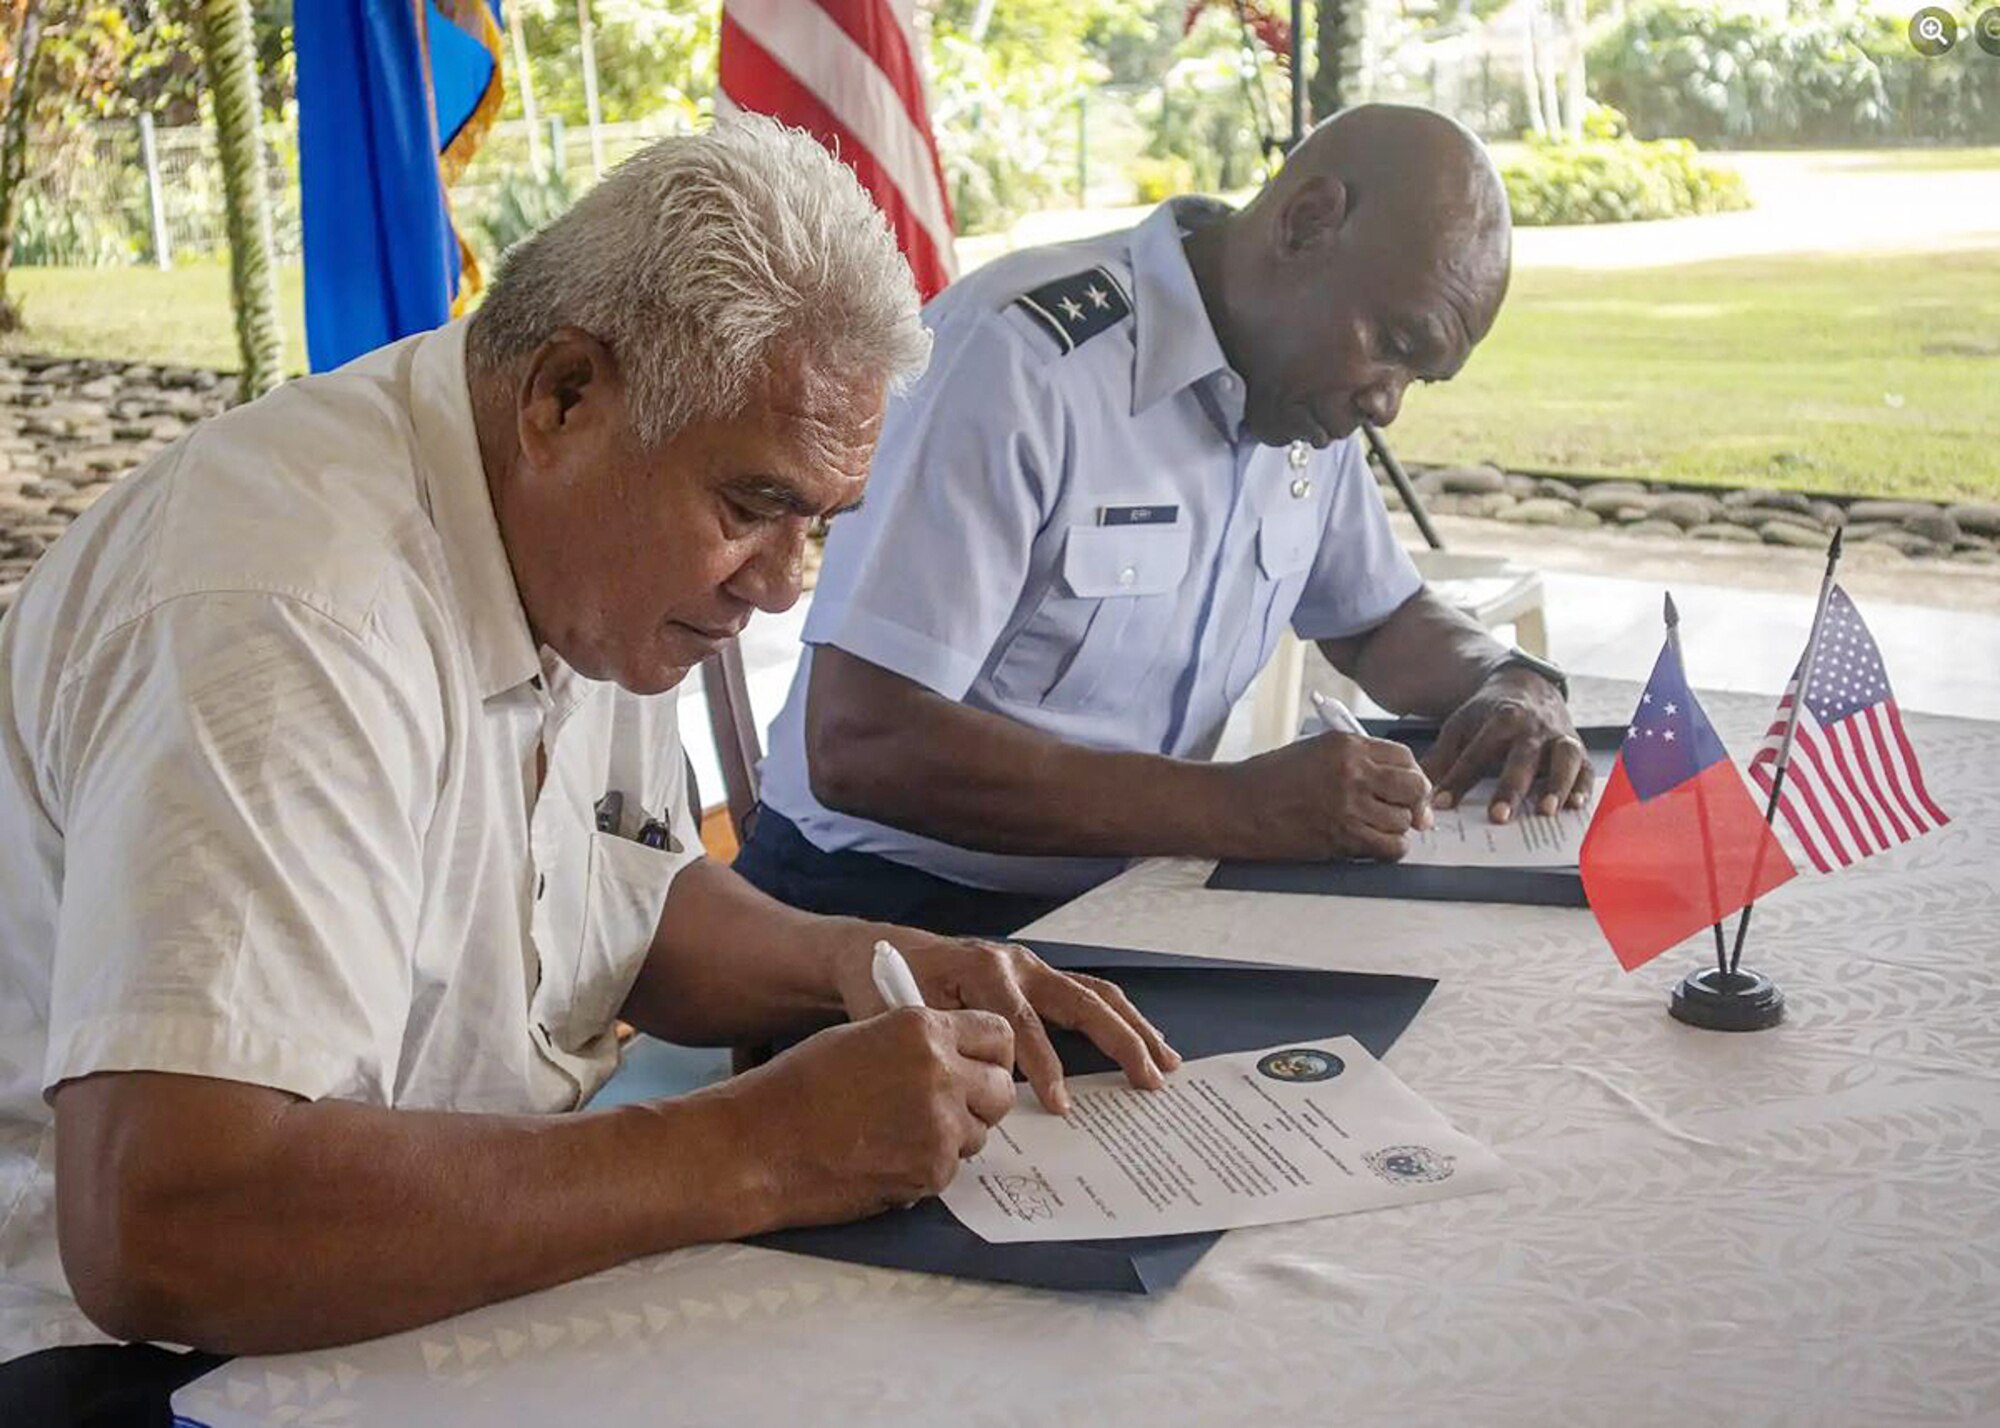 The Honorable Faualo Harry Schuster, the Government of Samoa’s Minister of Police, Prisons and Corrections Services, left, and Nevada Guard Adjutant General Maj. Gen. Ondra Berry sign the Declaration of Partnership between the Nevada National Guard and the Government of Samoa on July 6 in Apia, Samoa.